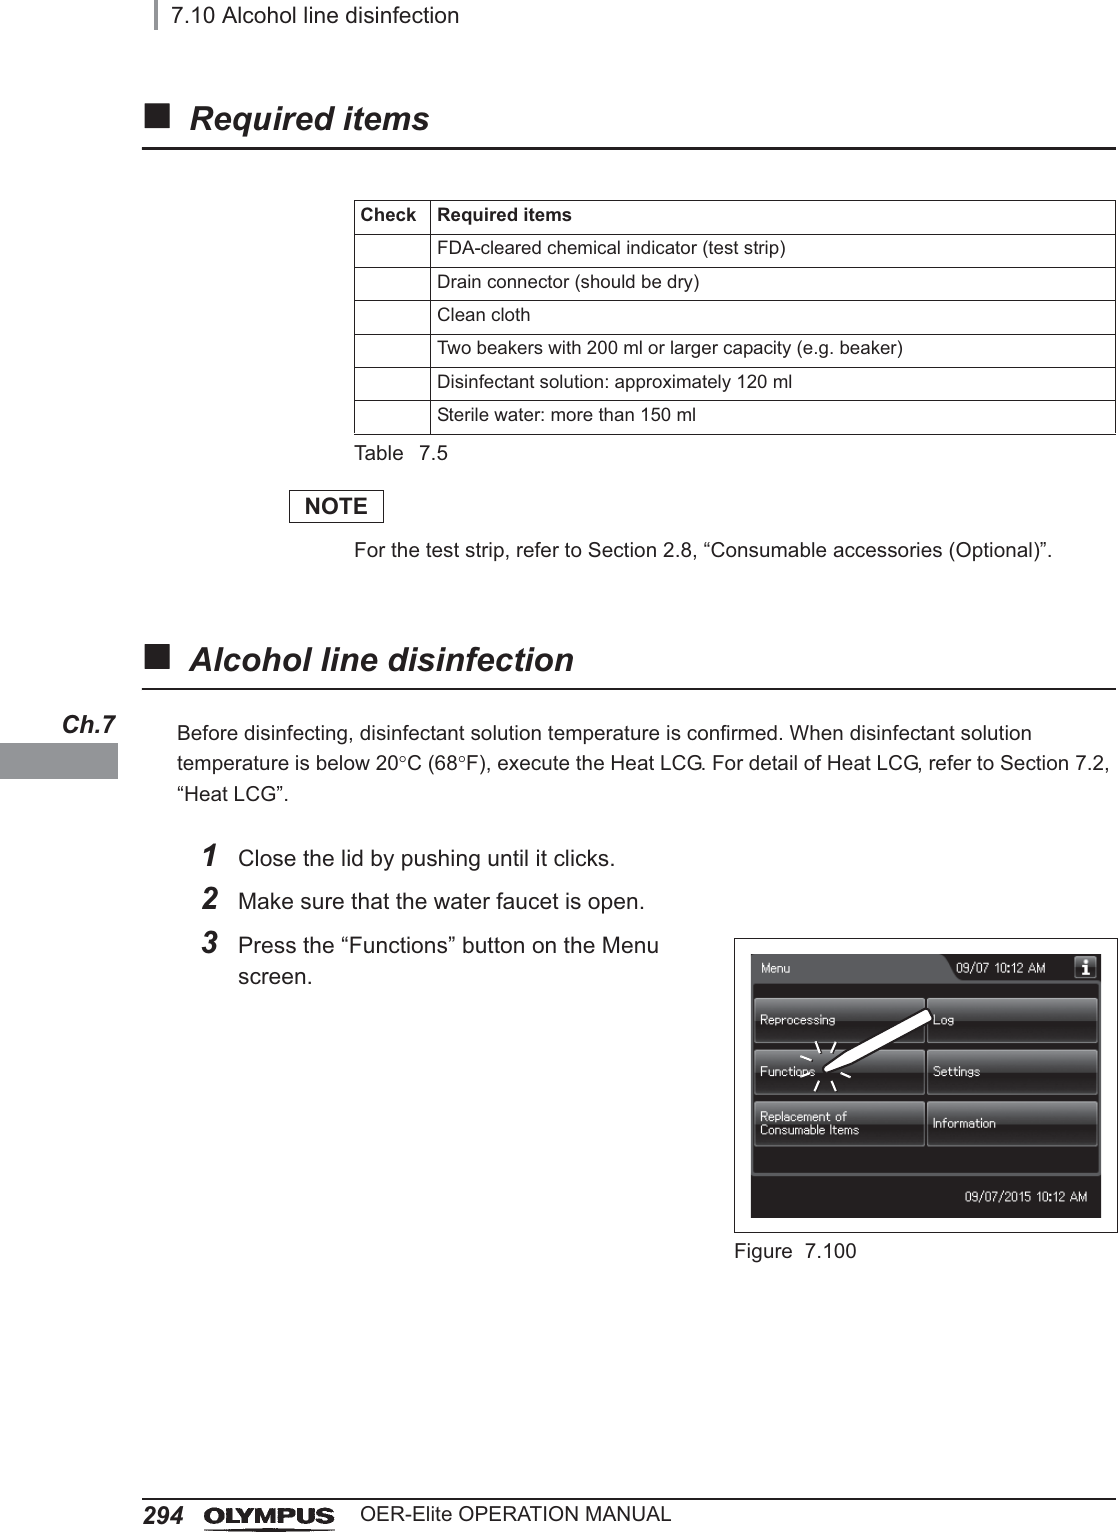 2947.10 Alcohol line disinfectionOER-Elite OPERATION MANUALCh.7Required itemsTable 7.5NOTEFor the test strip, refer to Section 2.8, “Consumable accessories (Optional)”.Alcohol line disinfectionBefore disinfecting, disinfectant solution temperature is confirmed. When disinfectant solution temperature is below 20qC (68qF), execute the Heat LCG. For detail of Heat LCG, refer to Section 7.2, “Heat LCG”.Check Required itemsFDA-cleared chemical indicator (test strip)Drain connector (should be dry)Clean clothTwo beakers with 200 ml or larger capacity (e.g. beaker)Disinfectant solution: approximately 120 mlSterile water: more than 150 ml1Close the lid by pushing until it clicks.2Make sure that the water faucet is open.3Press the “Functions” button on the Menu screen.Figure 7.100